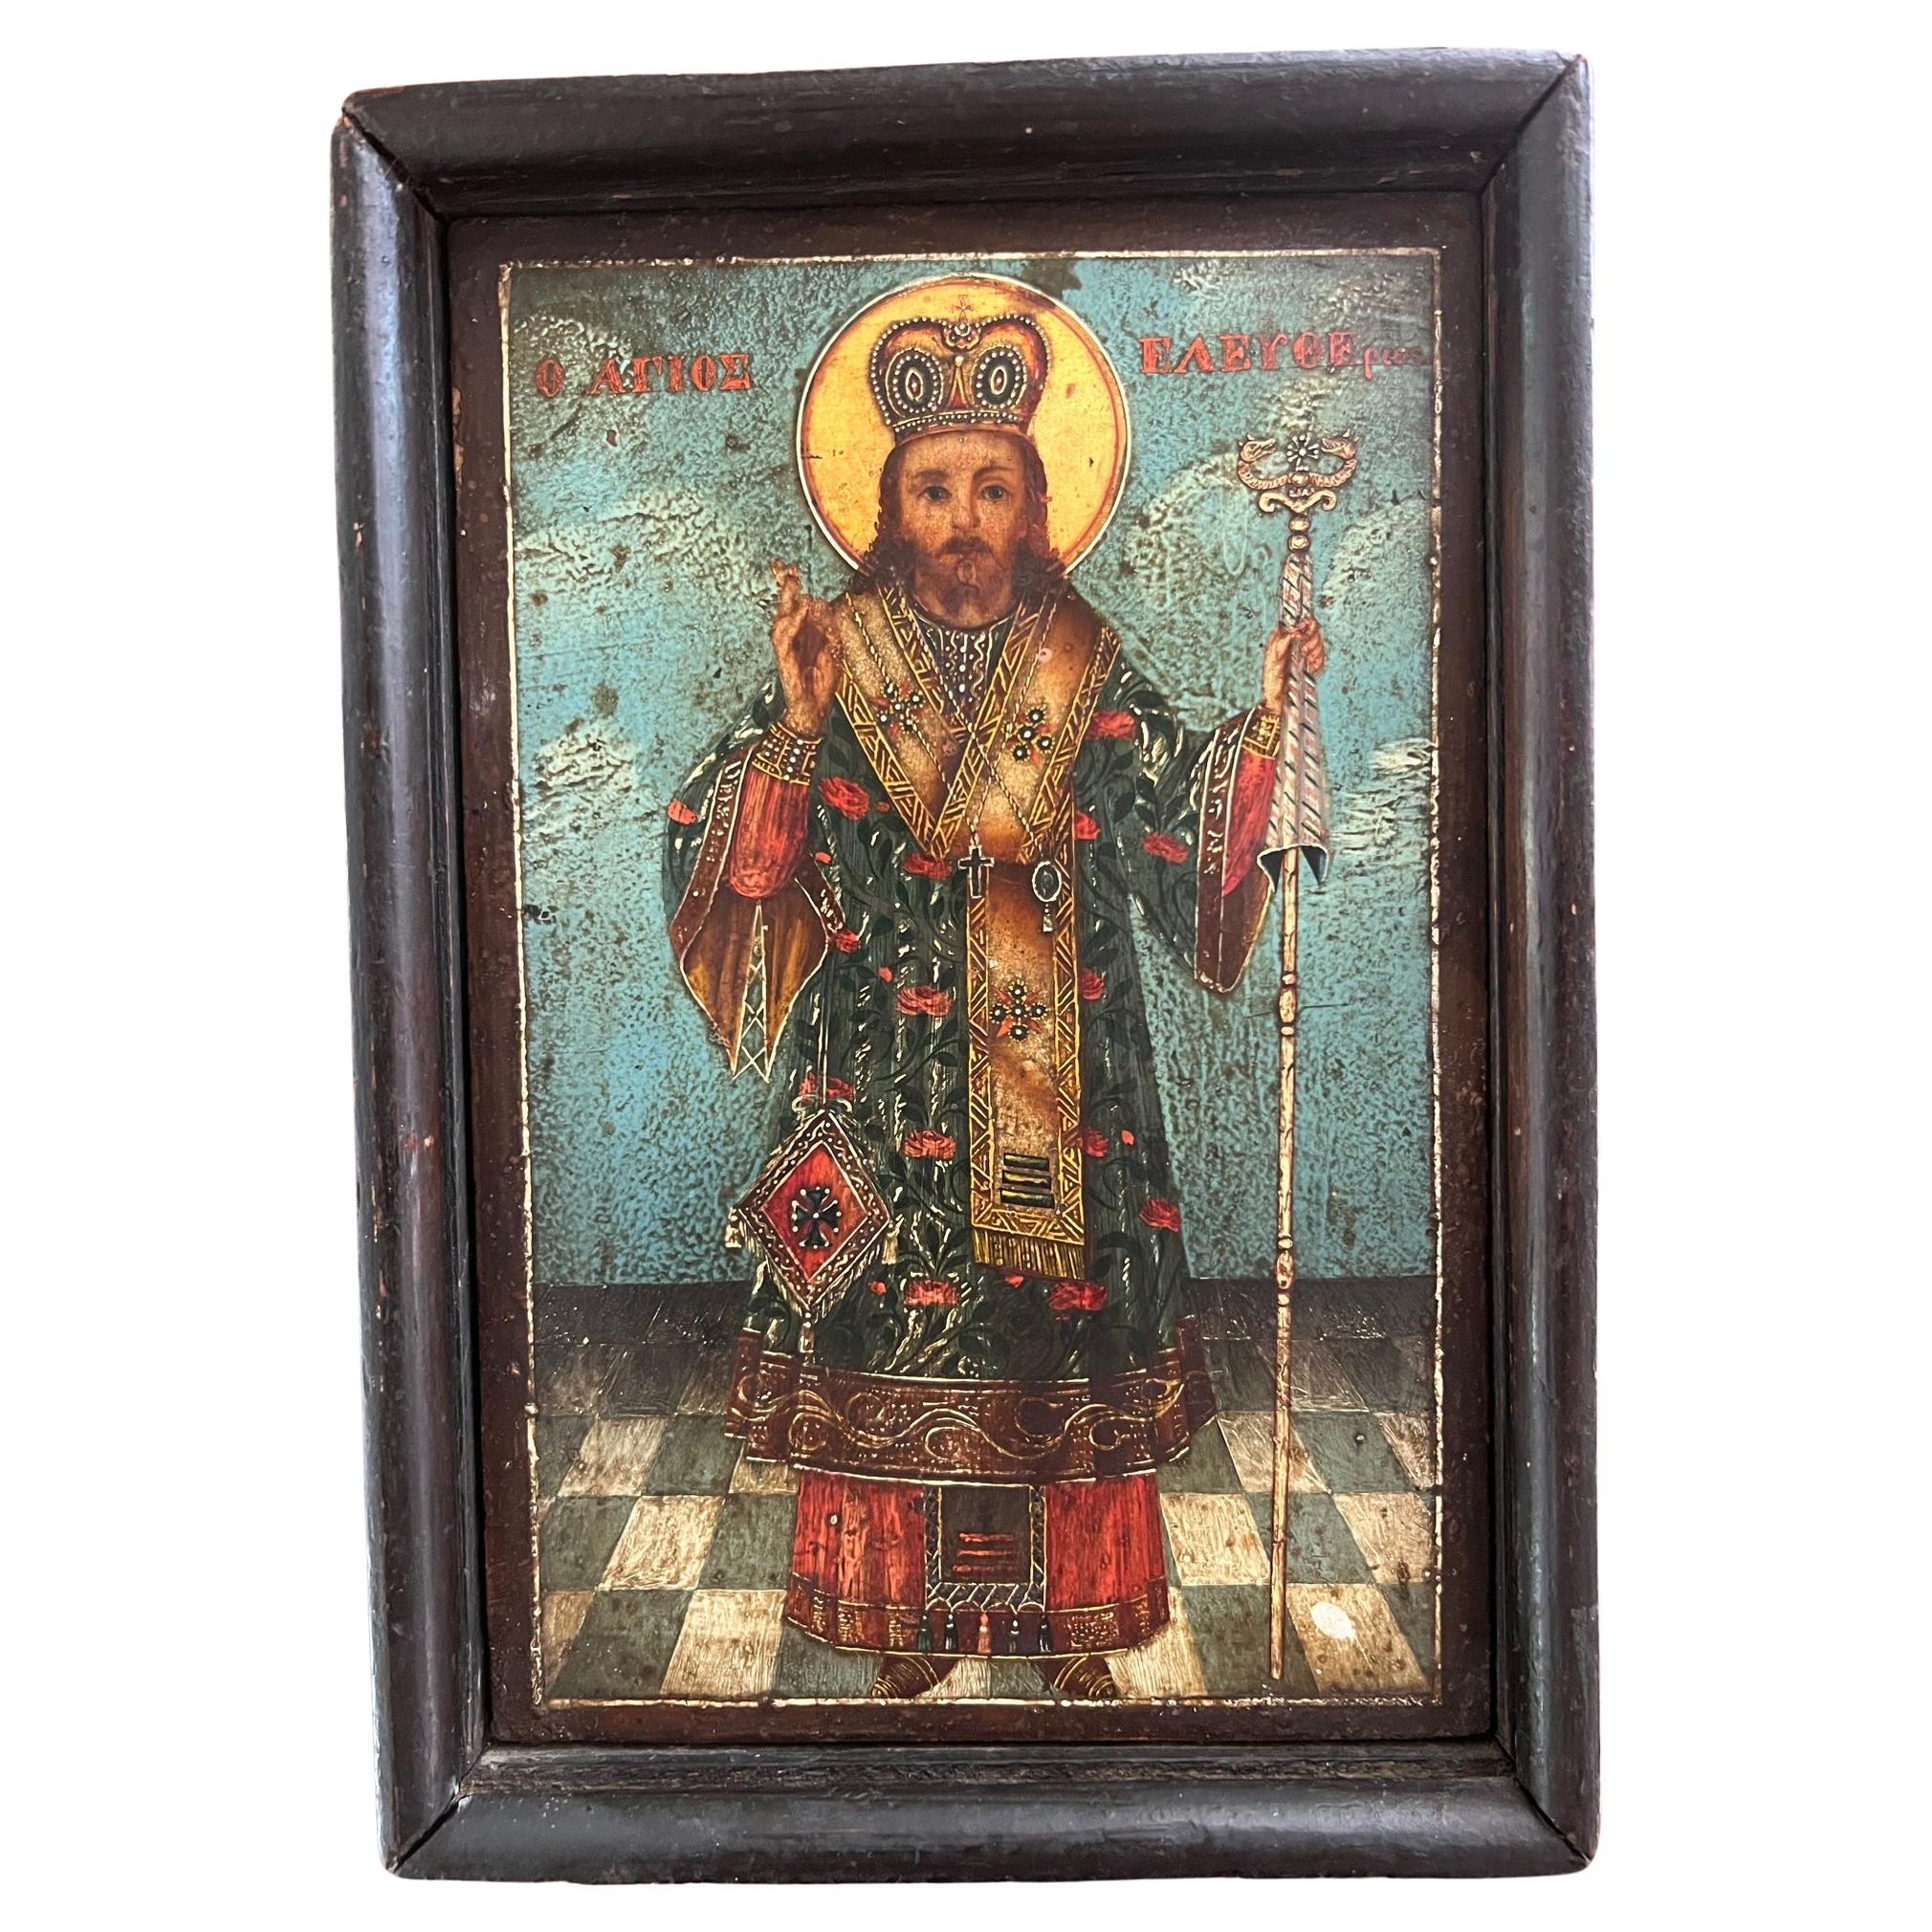 Antique Framed Icon Painted on Wood With Gilt Accents